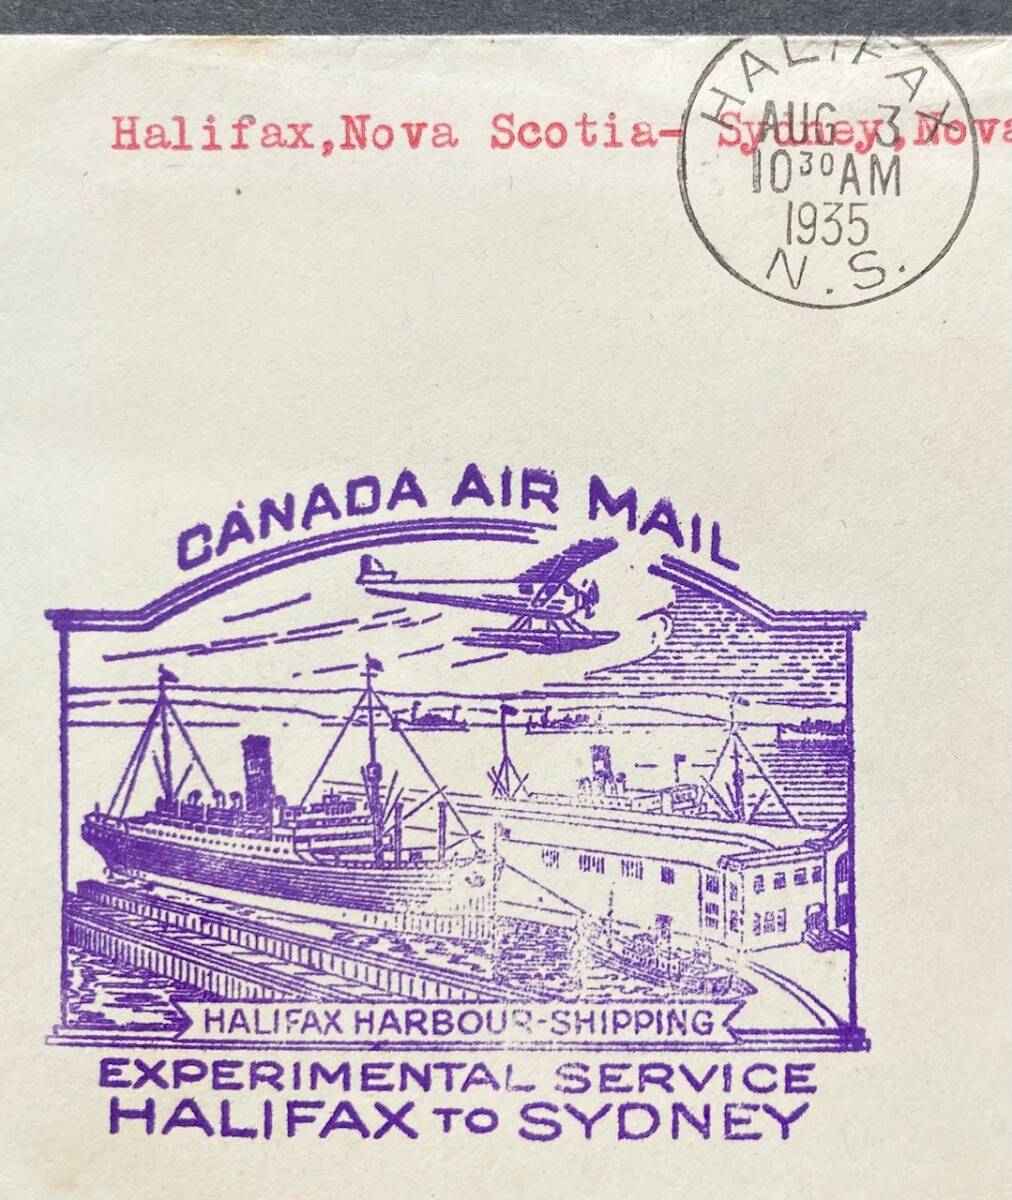 [ Canada ]1935 year FFC~HALIFAX-SYDNEY(no bus kosia) superior article * examination flight flight rubber seal kashe pushed ~ water airplane design superior article 